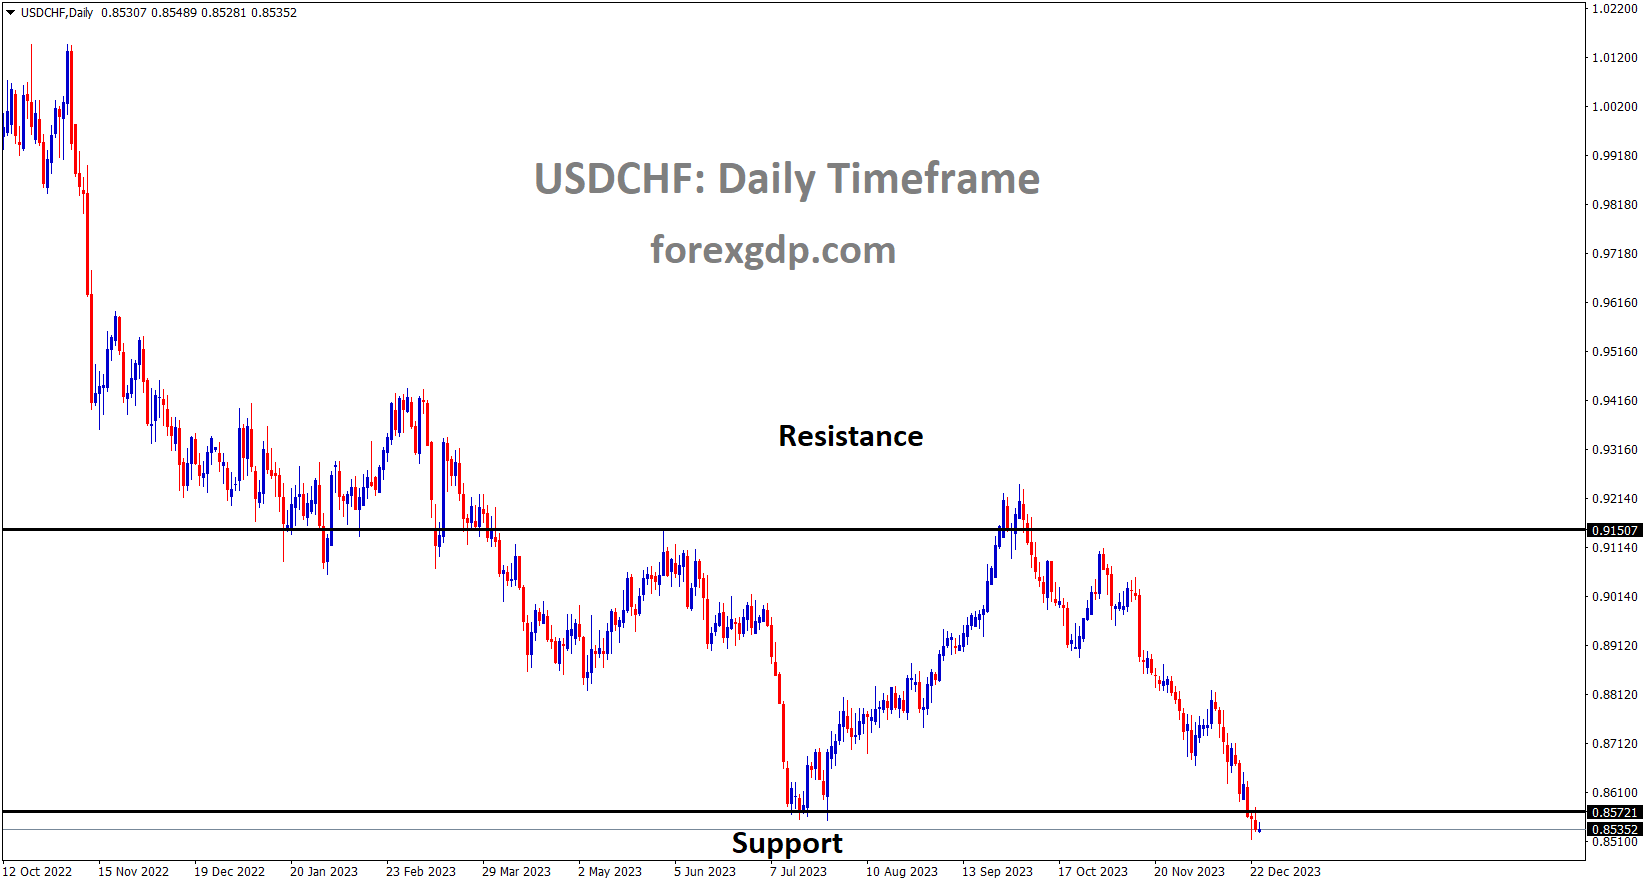 USDCHF is moving in the Box pattern and the market has reached the Support area of the Box pattern